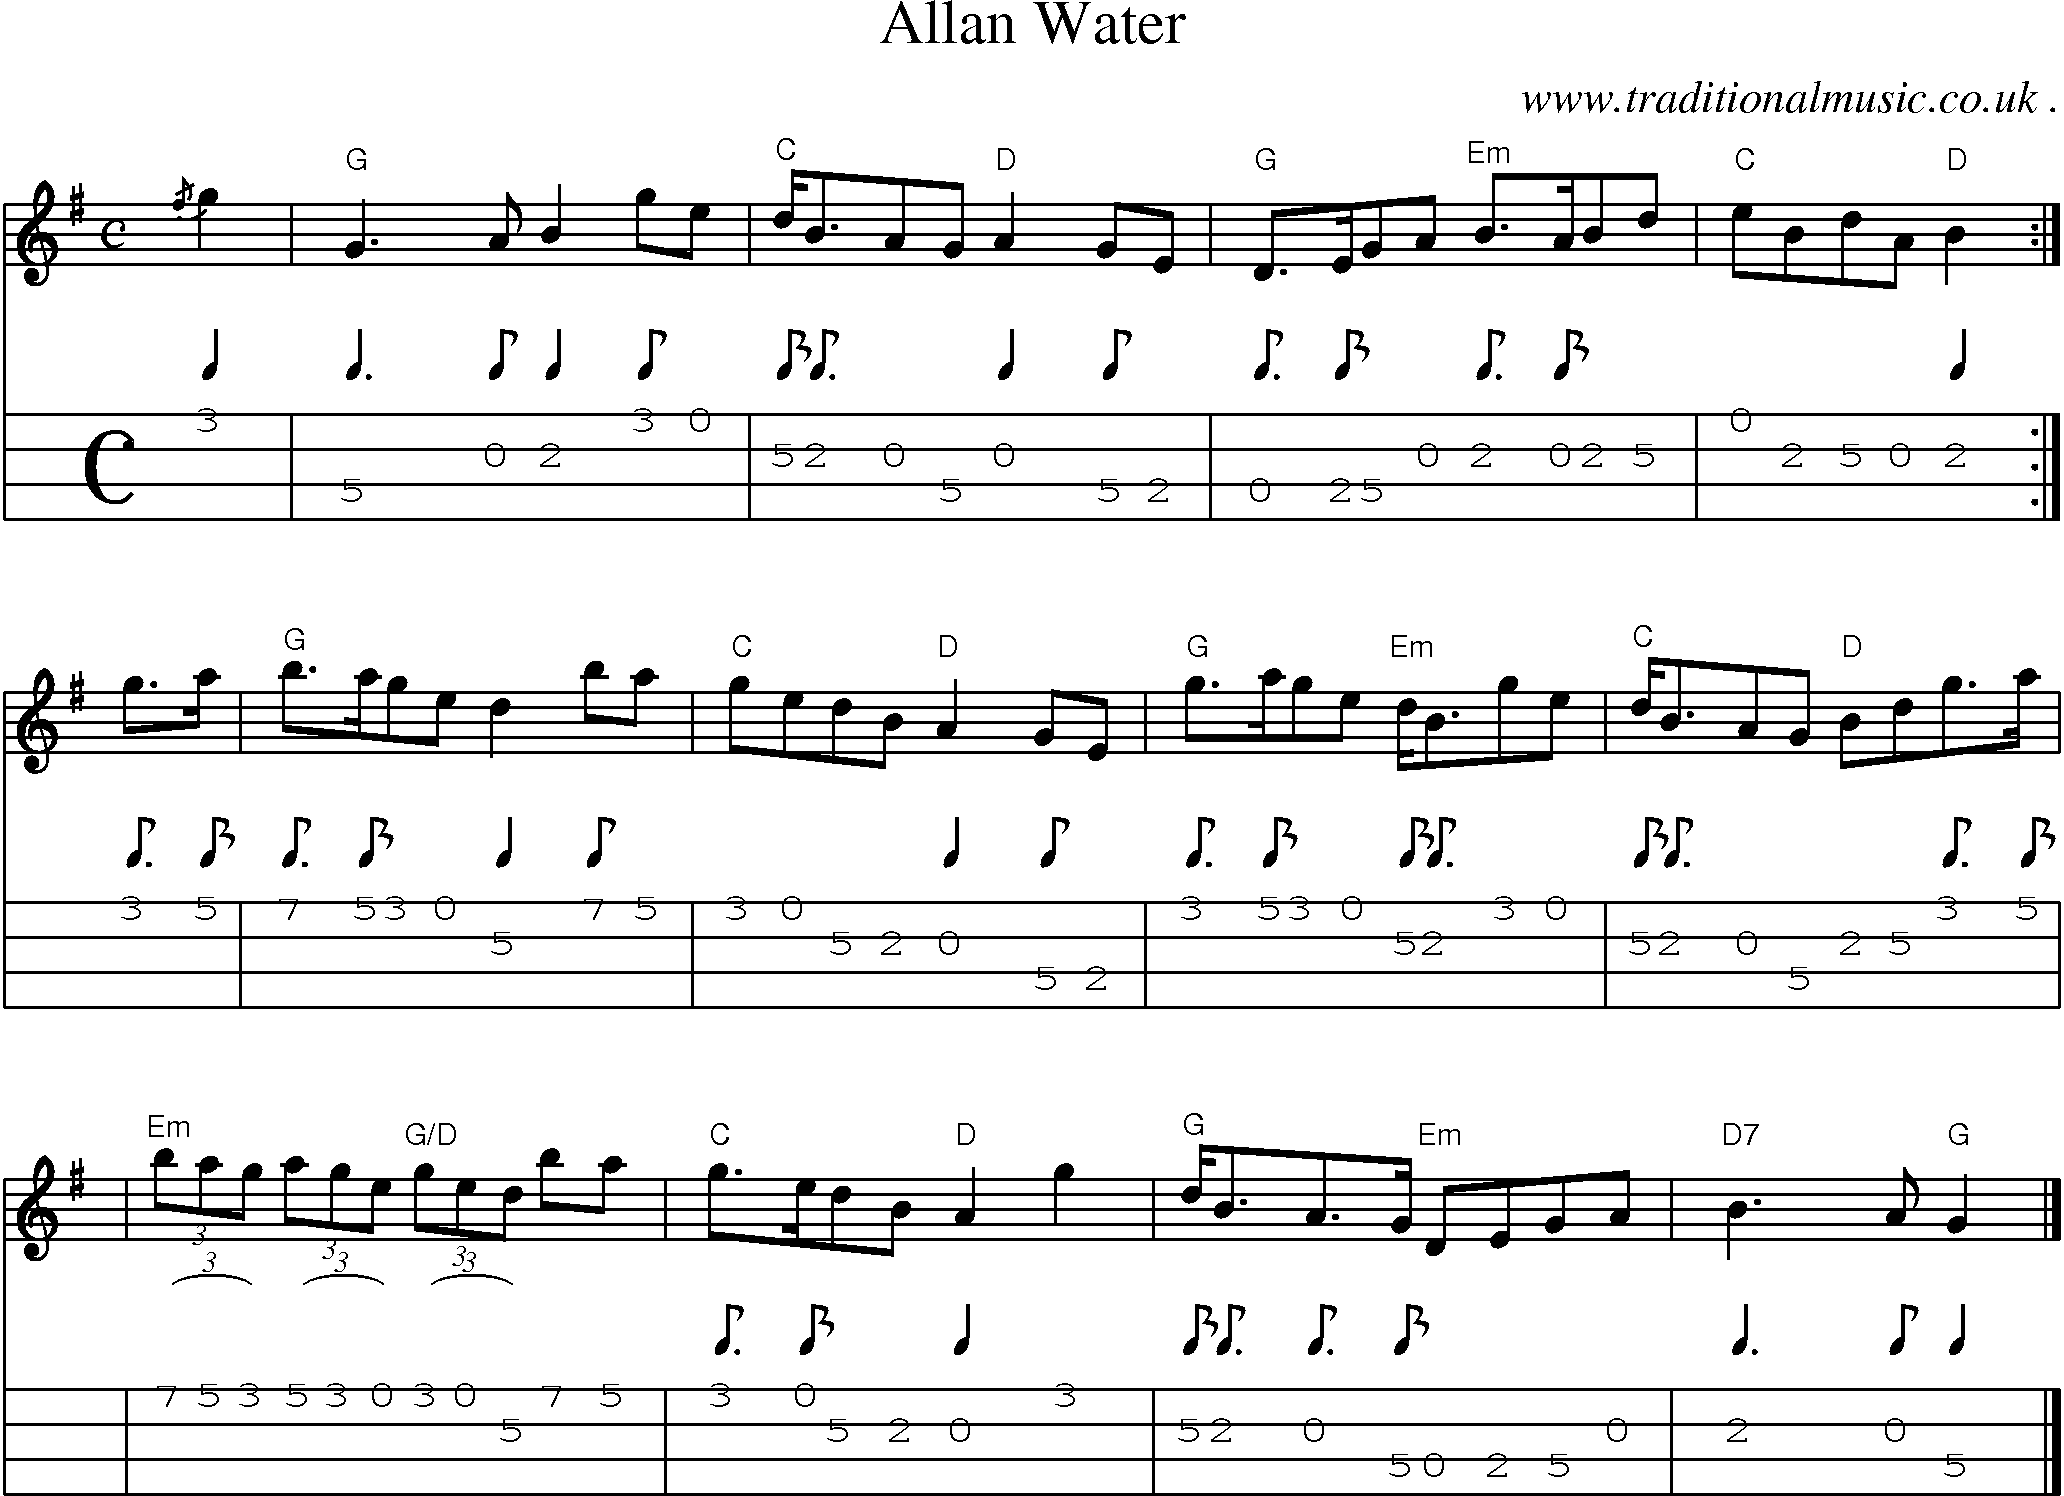 Sheet-music  score, Chords and Mandolin Tabs for Allan Water